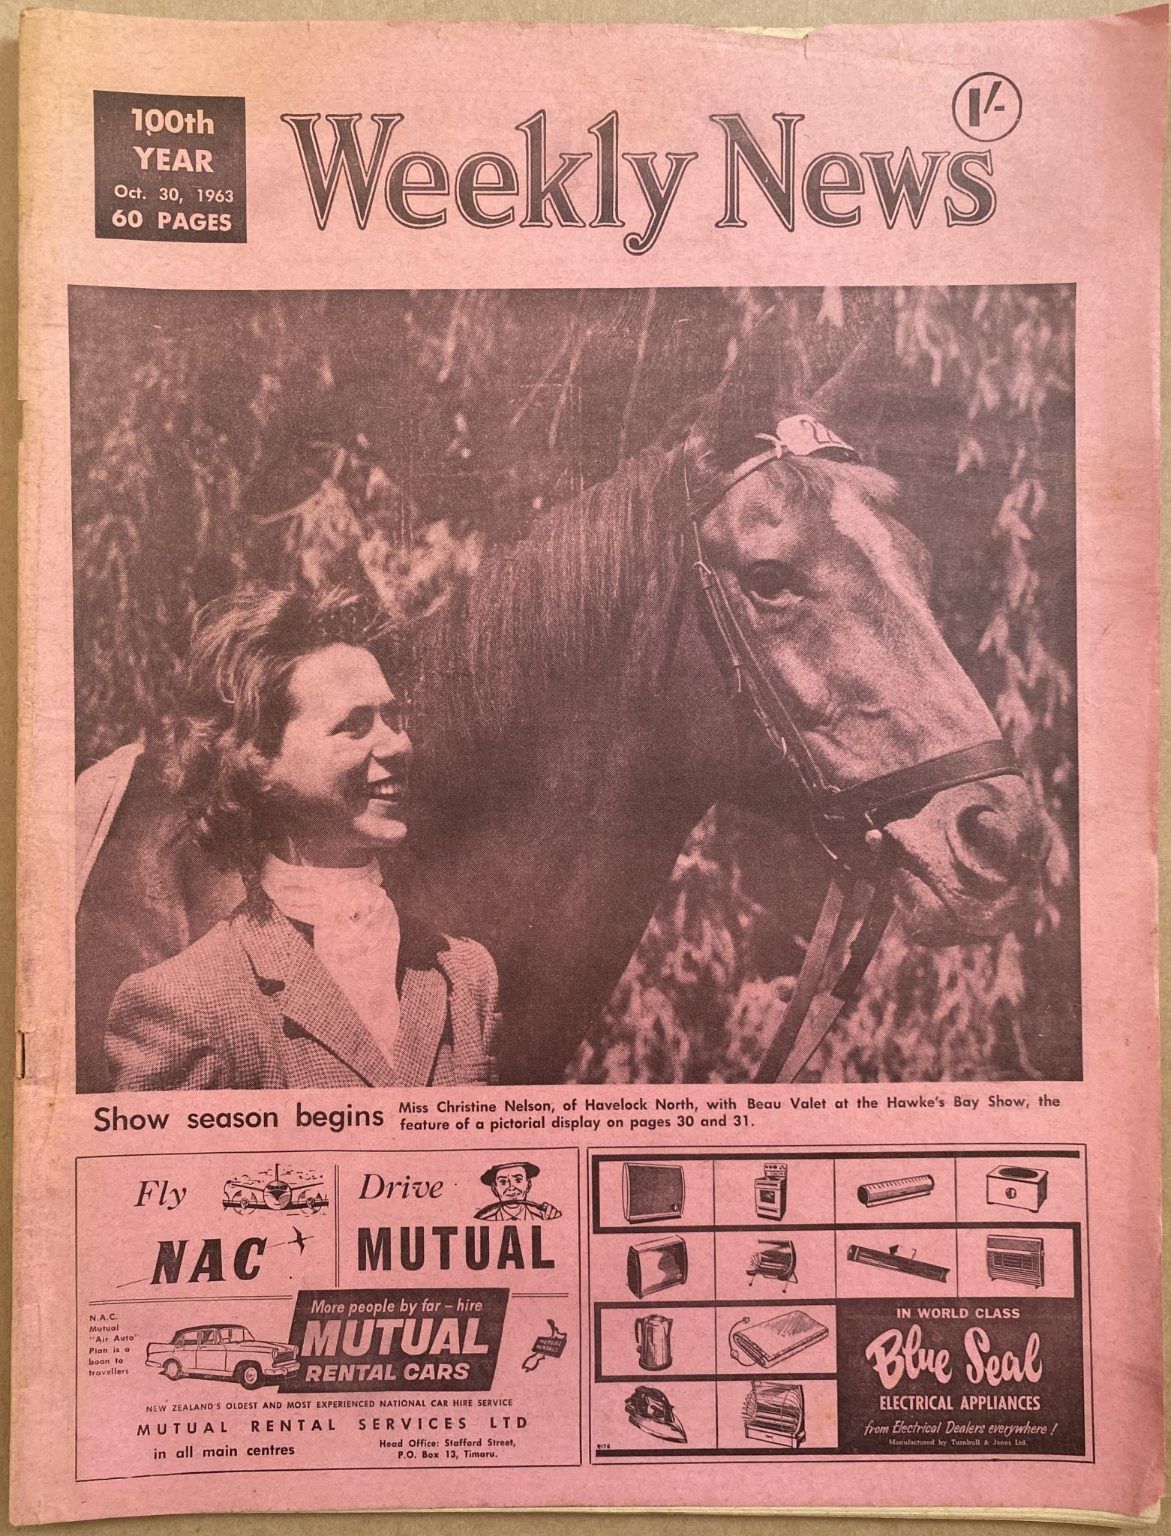 OLD NEWSPAPER: The Weekly News, No. 5214, 30 October 1963